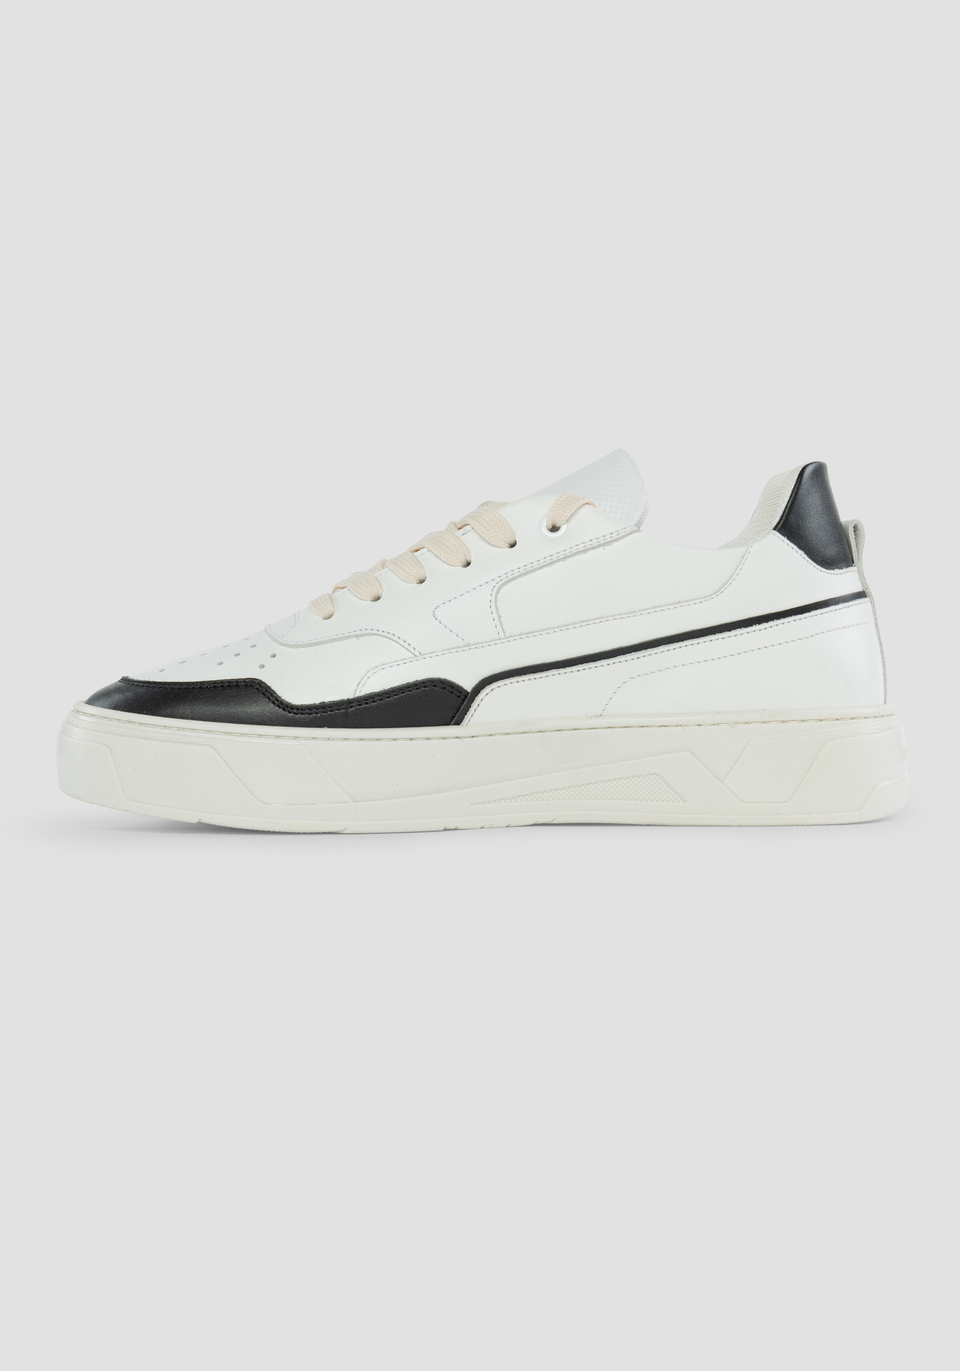 "707" LOW-TOP LEATHER SNEAKERS WITH CONTRASTING DETAILS AND PERFORATED TOE - Antony Morato Online Shop